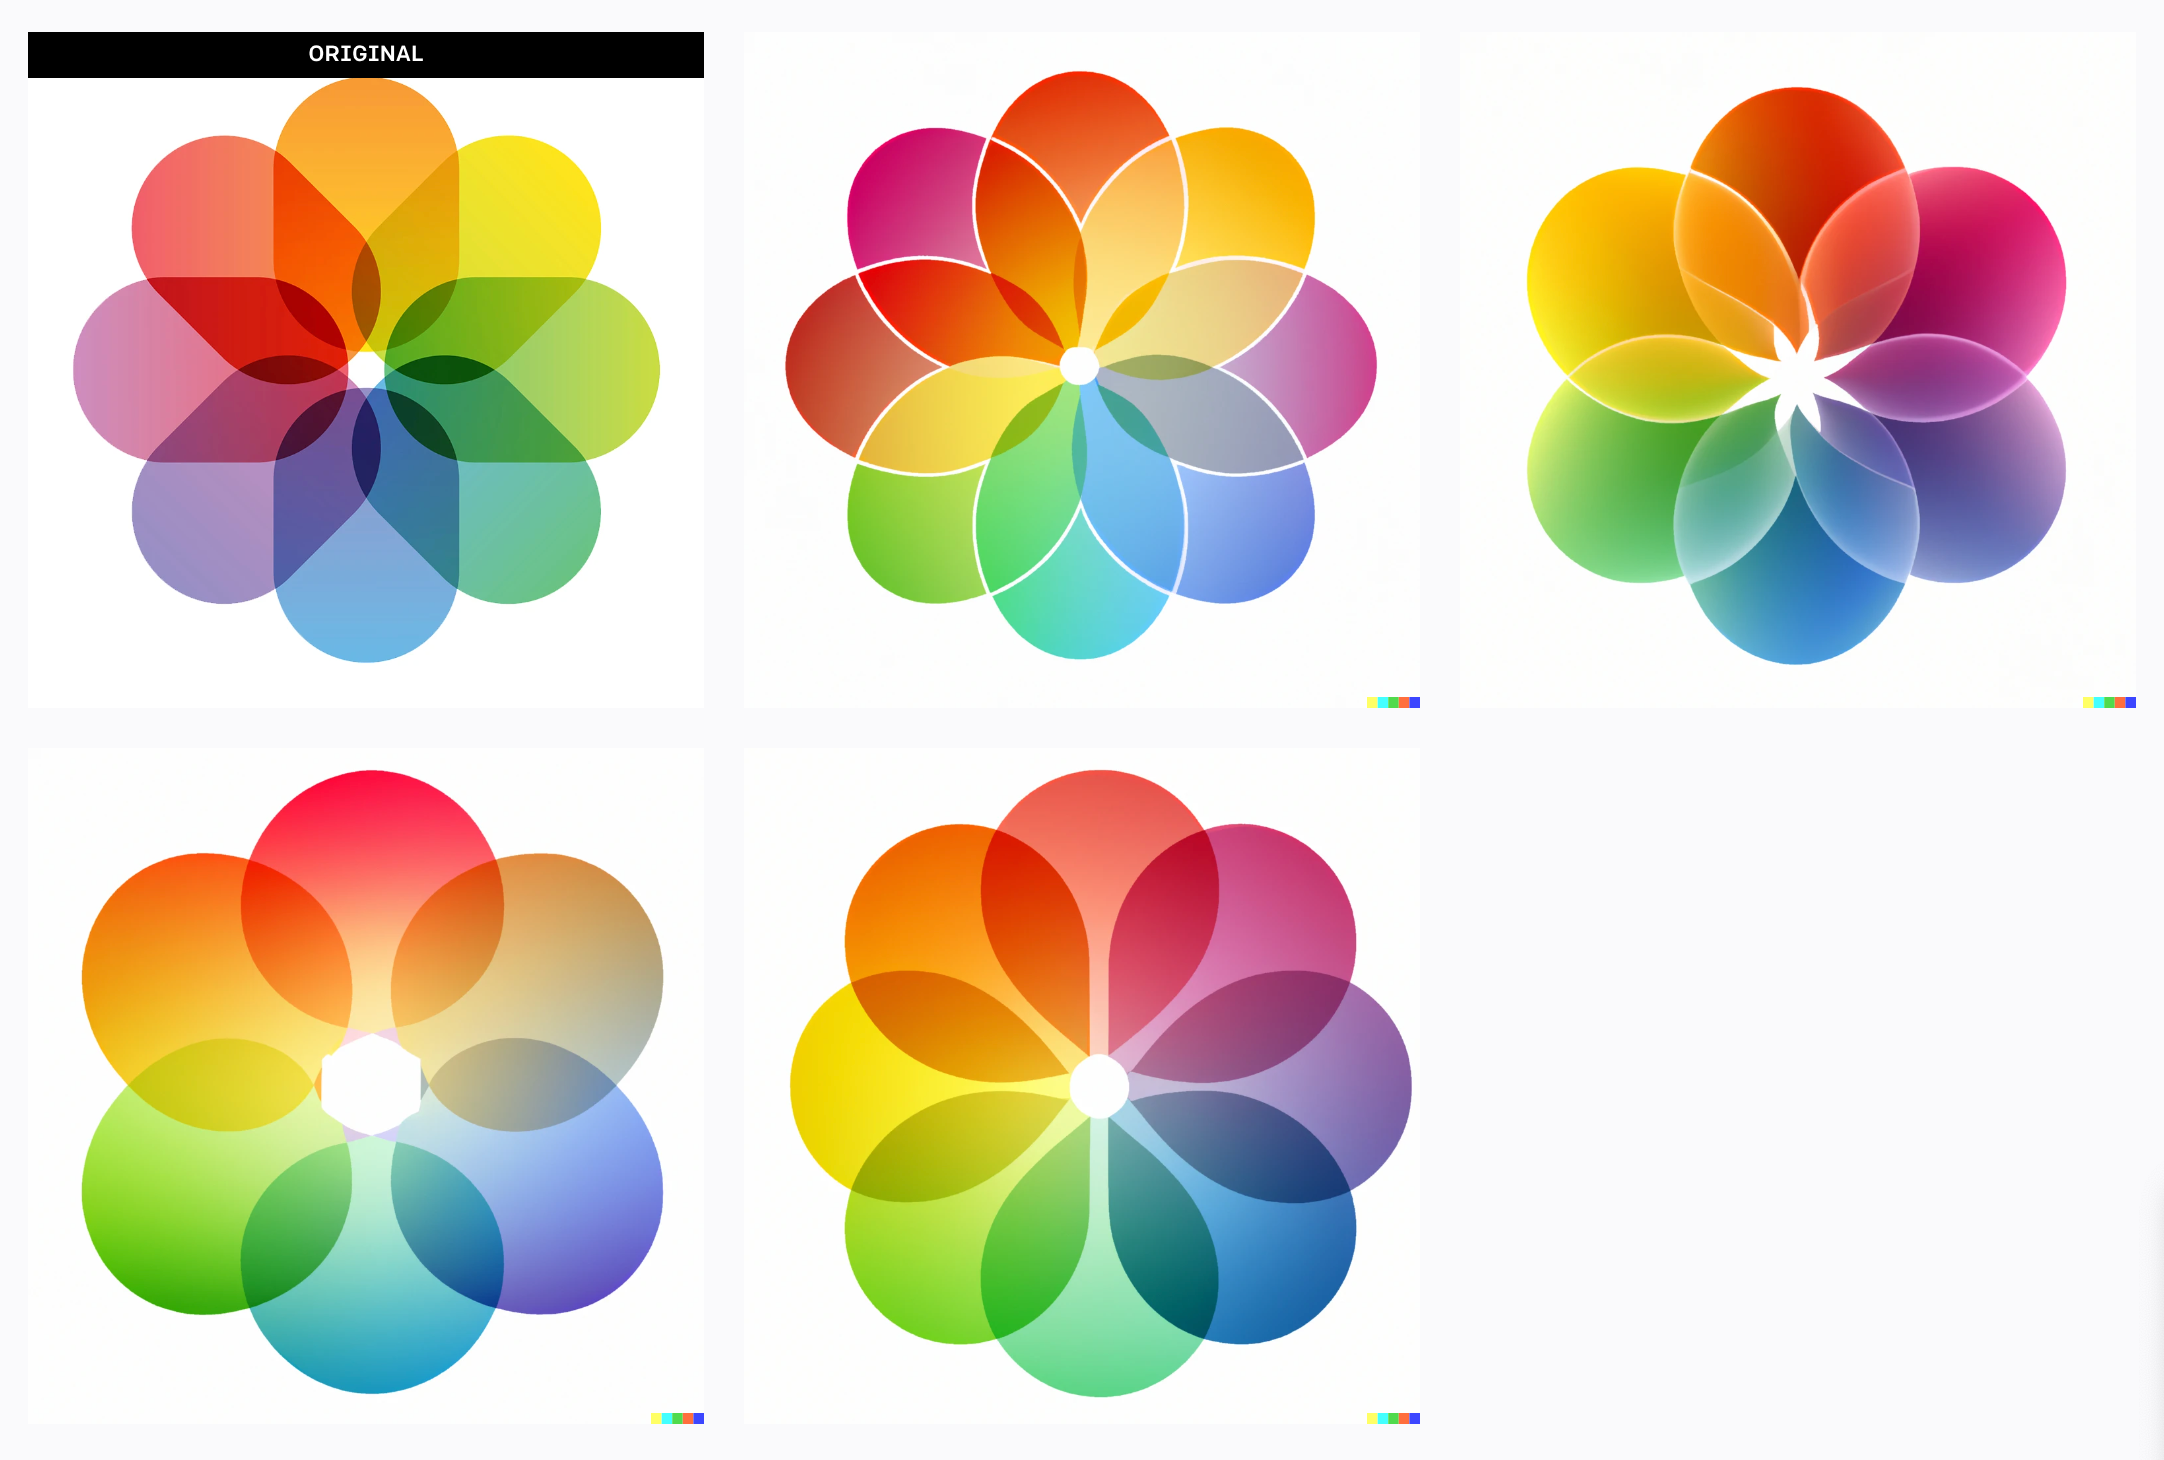 The original “Photos” app icon with 4 AI-generated variations alongside it.